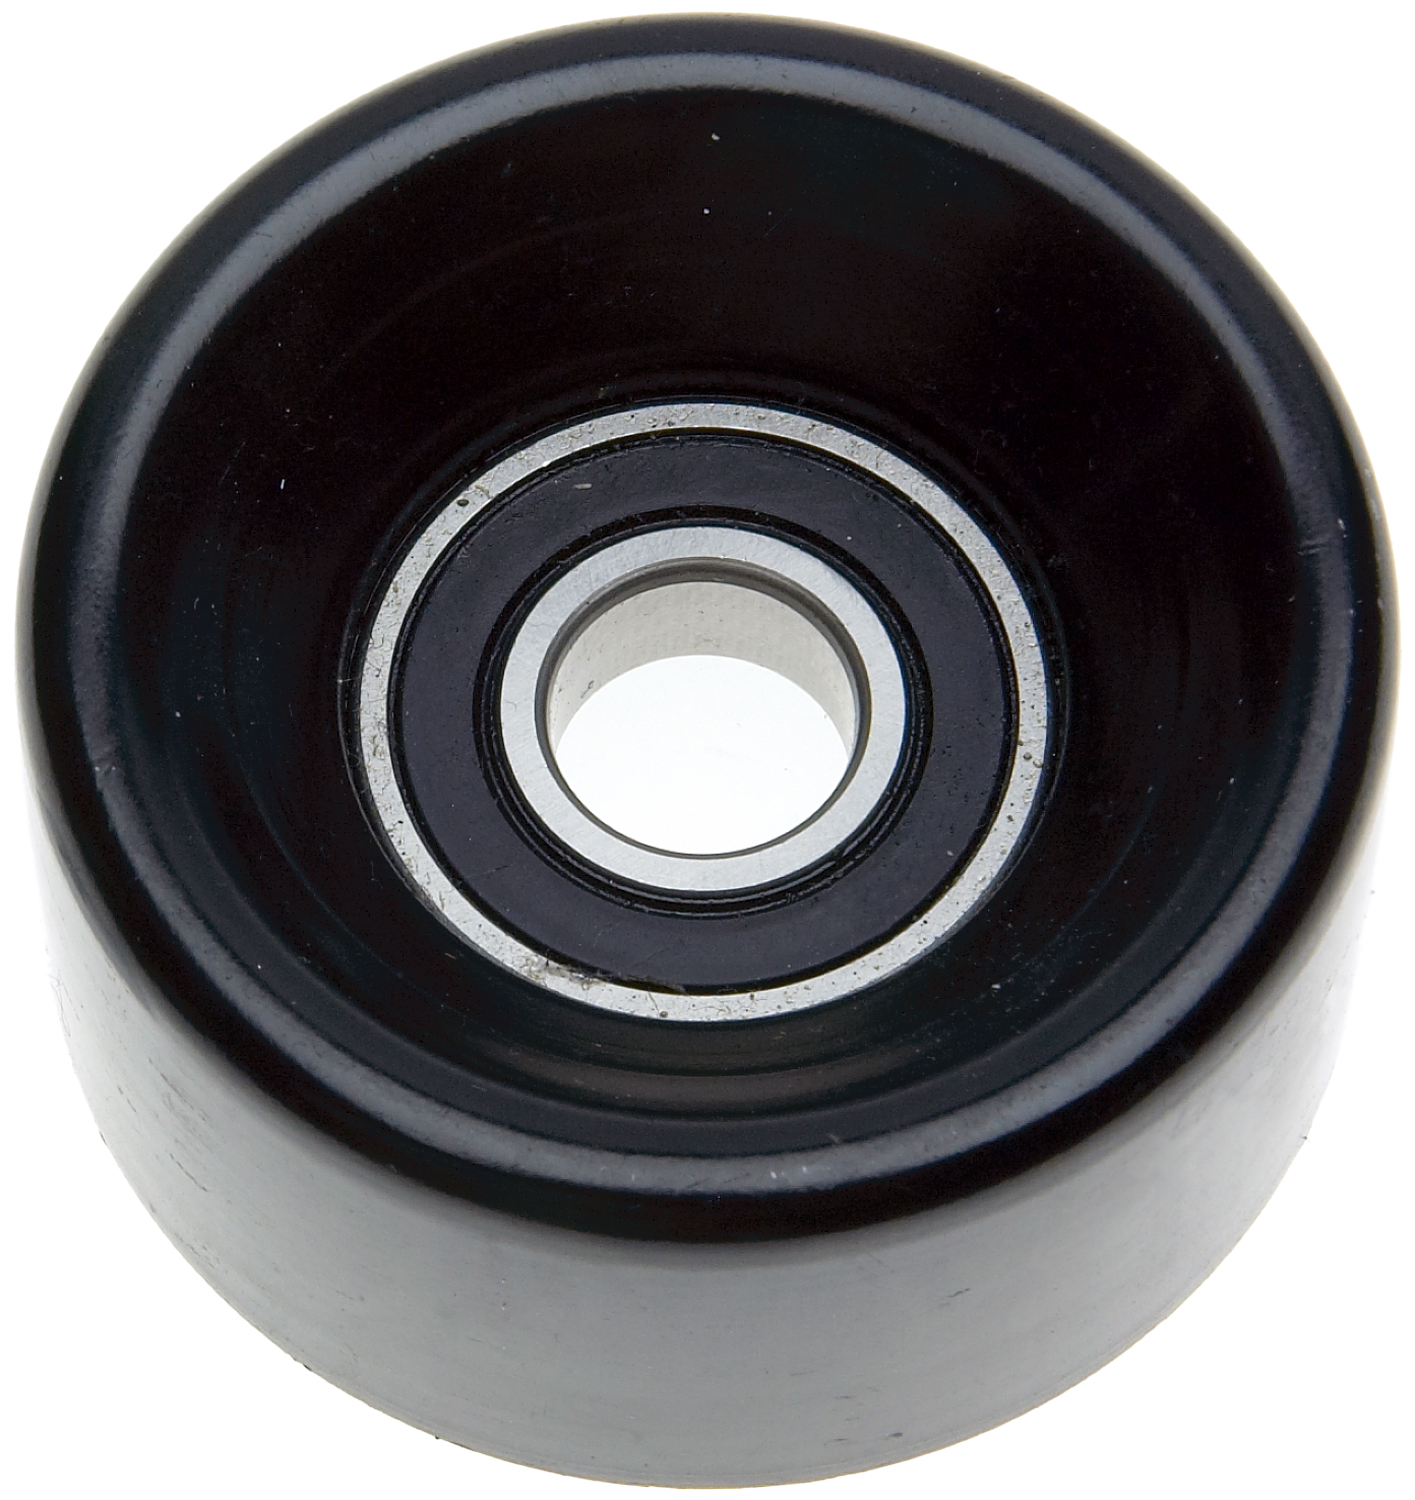 Picture of Gates Racing 38028 Super Duty Accessory Belt Idler Pulley